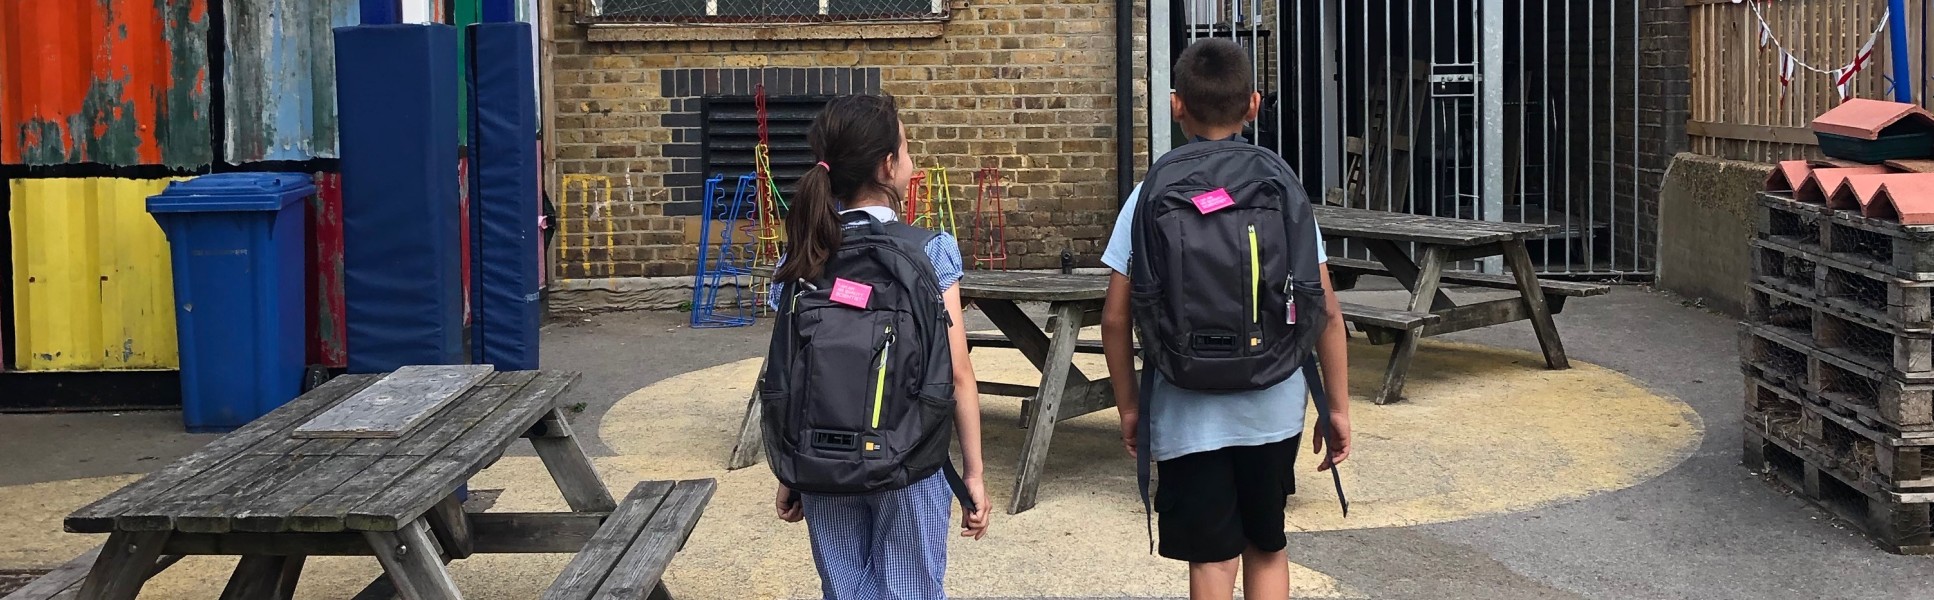 Children with air quality monitoring backpacks